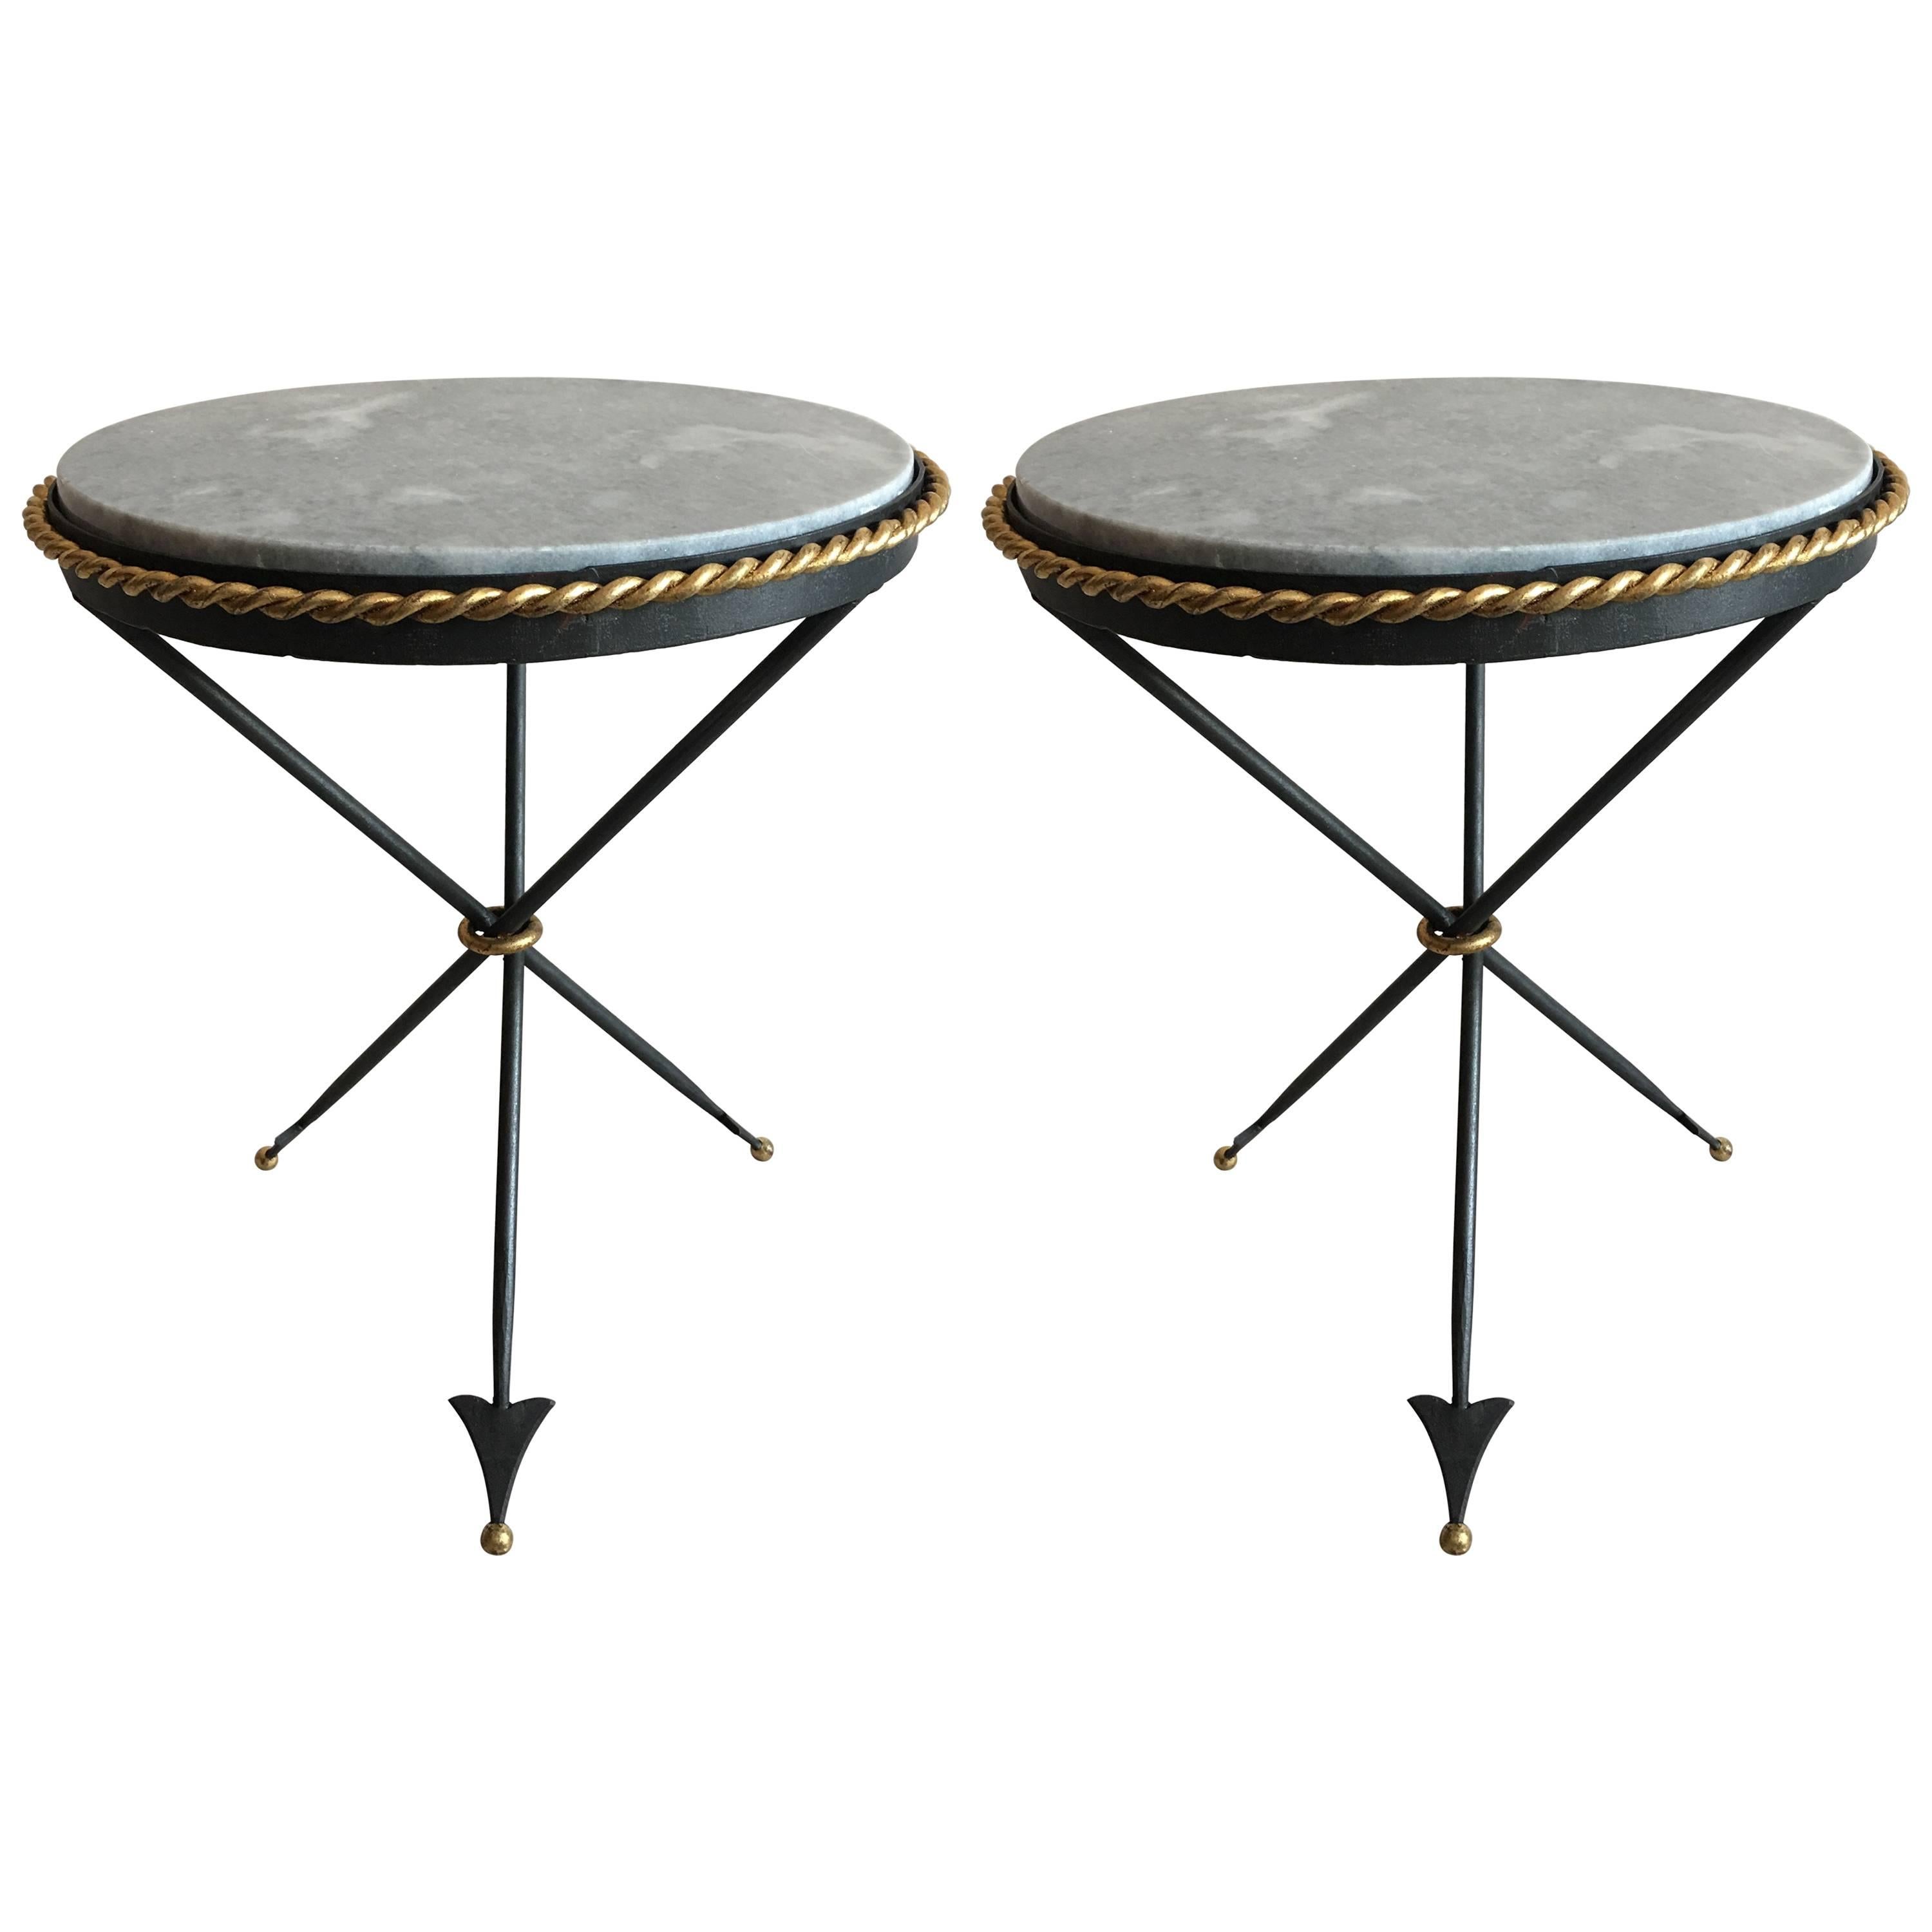 Pair of French Mid-Century Modern Neoclassical Gilt Iron and Marble Side Tables